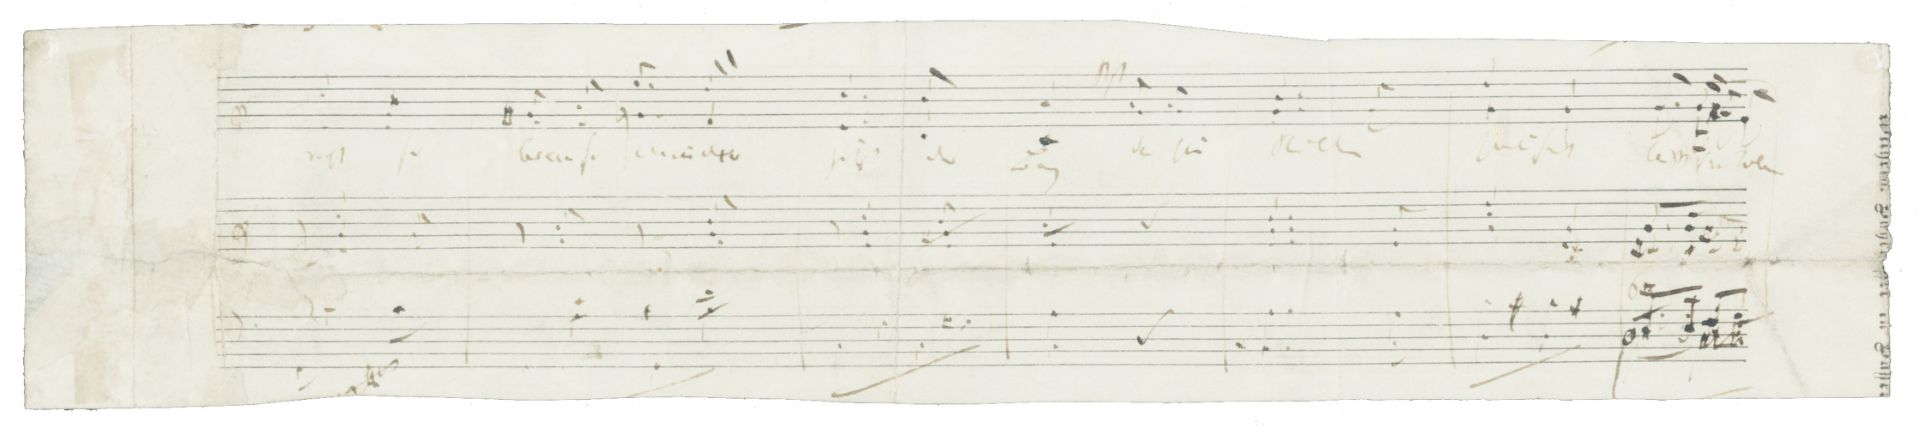 MUSIC - ROBERT SCHUMANN Autograph fragmentary sketches of three duets from the 'M&#228;dchenlied...